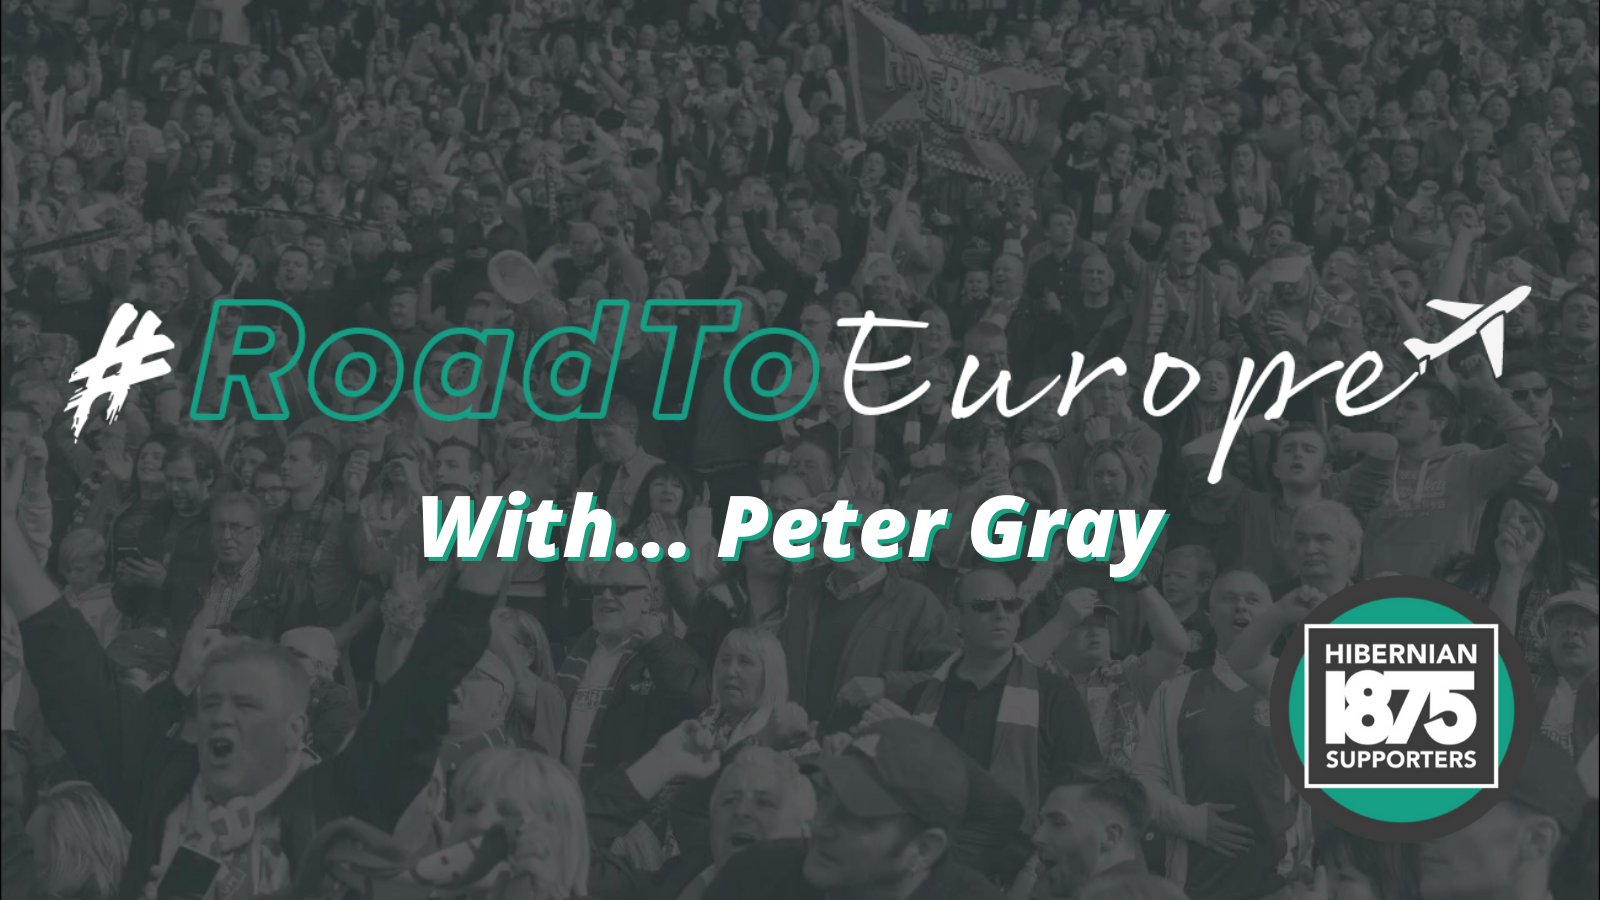 #RoadToEurope with Peter Gray